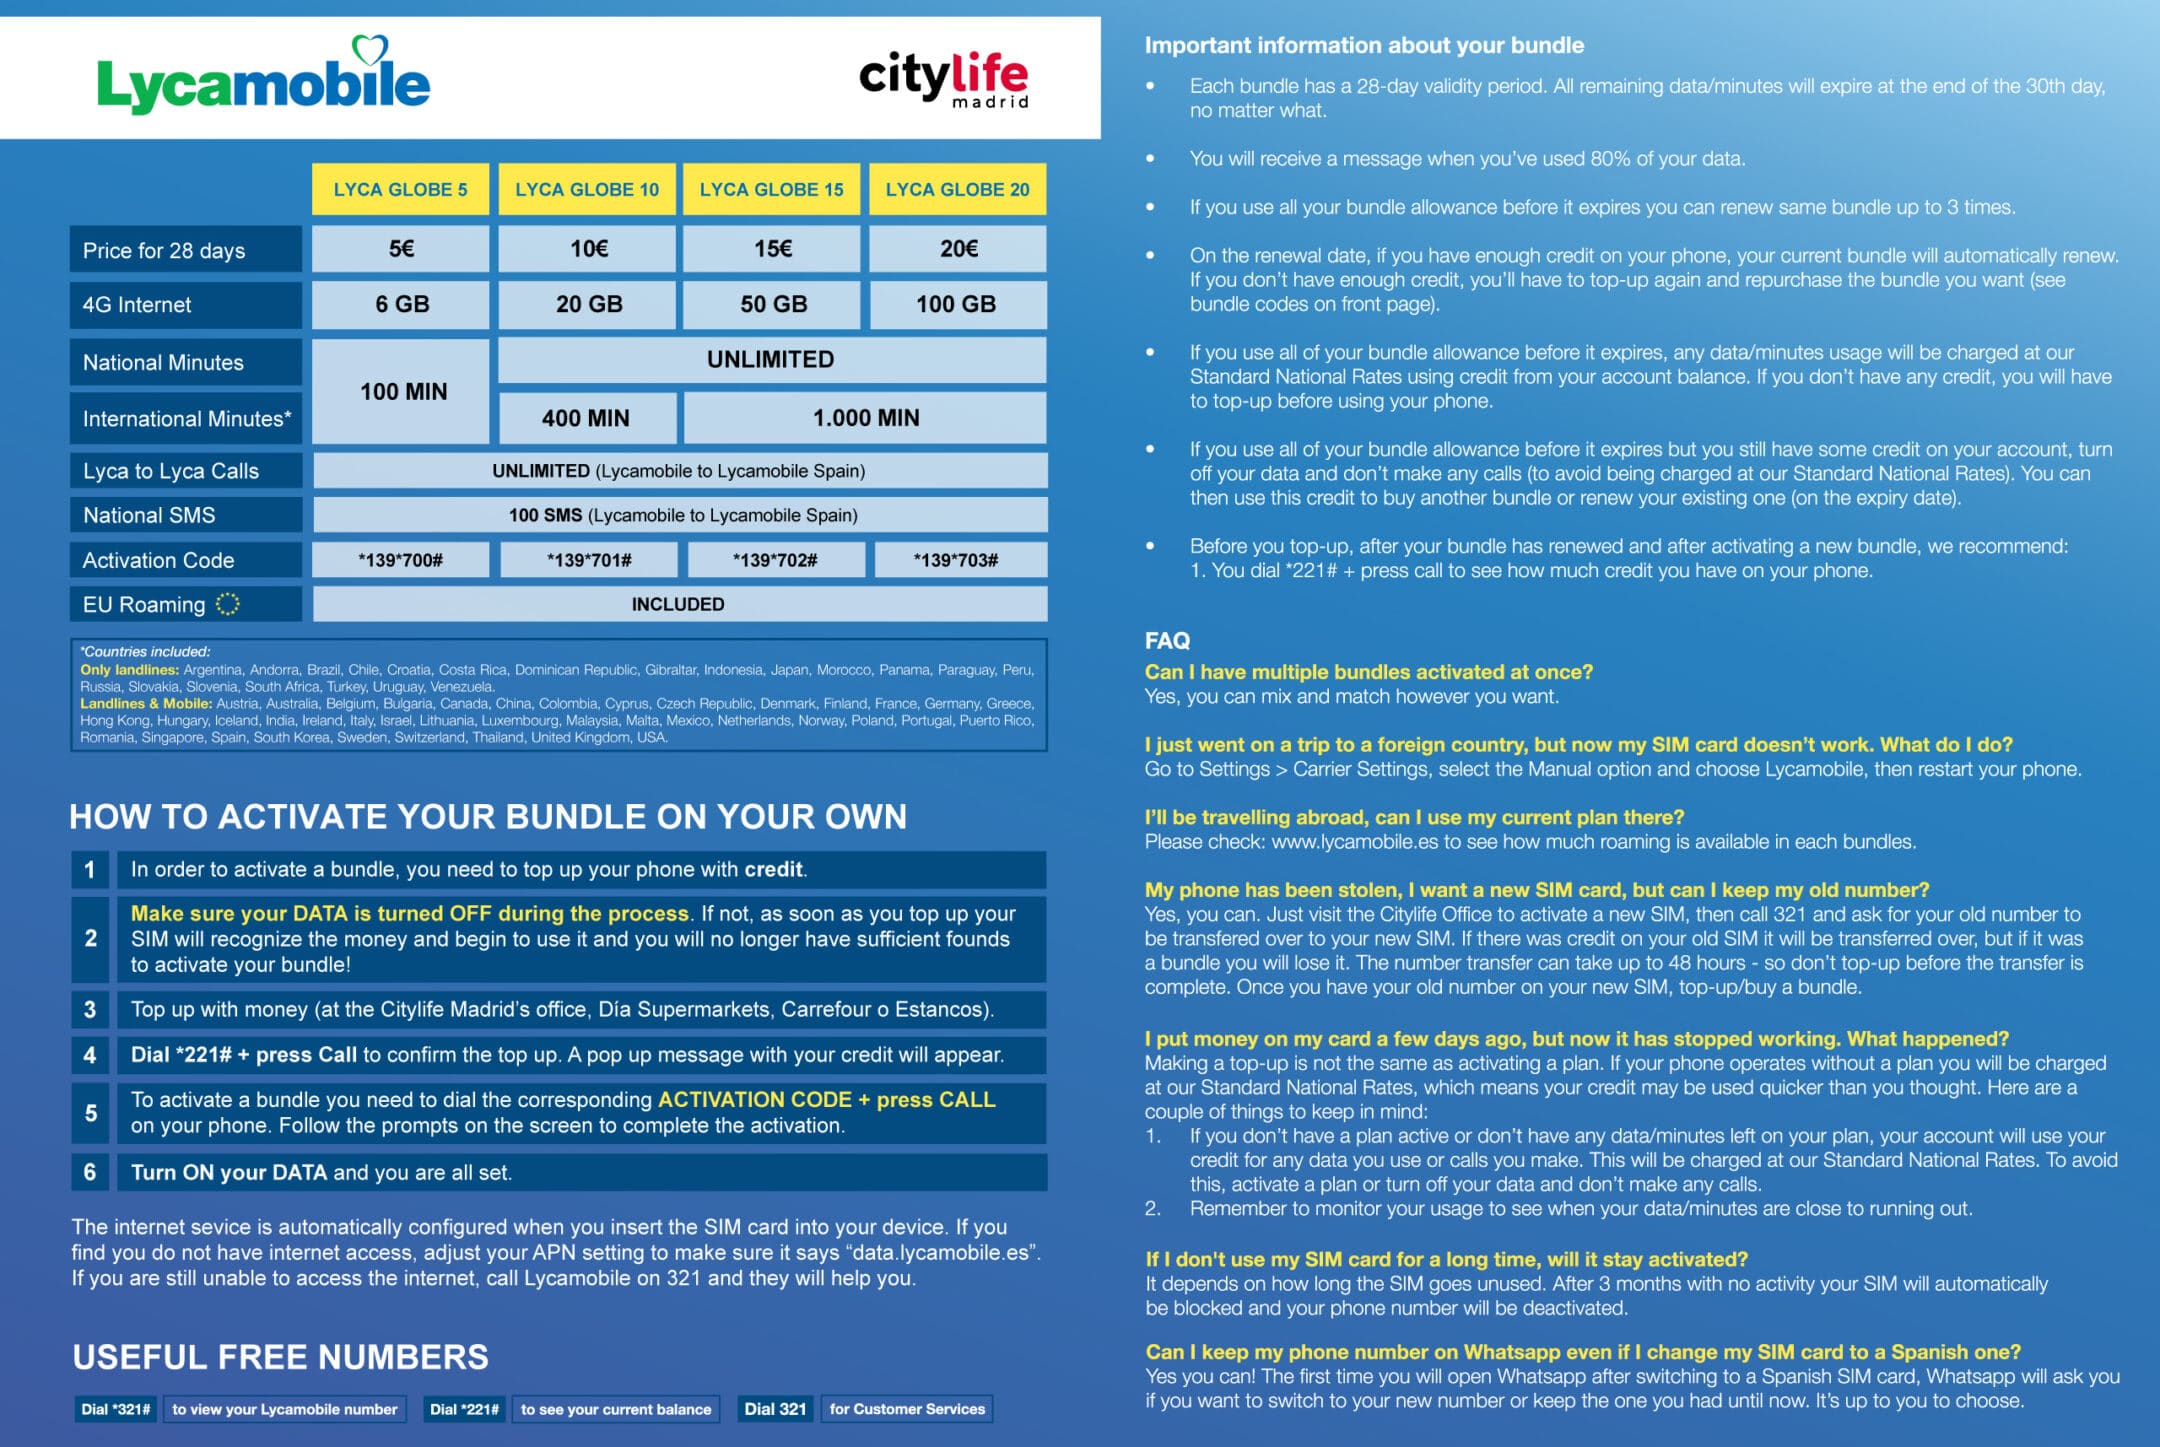 pay-as-you-go-sim-card-lycamobile-bundle-offers-citylife-madrid